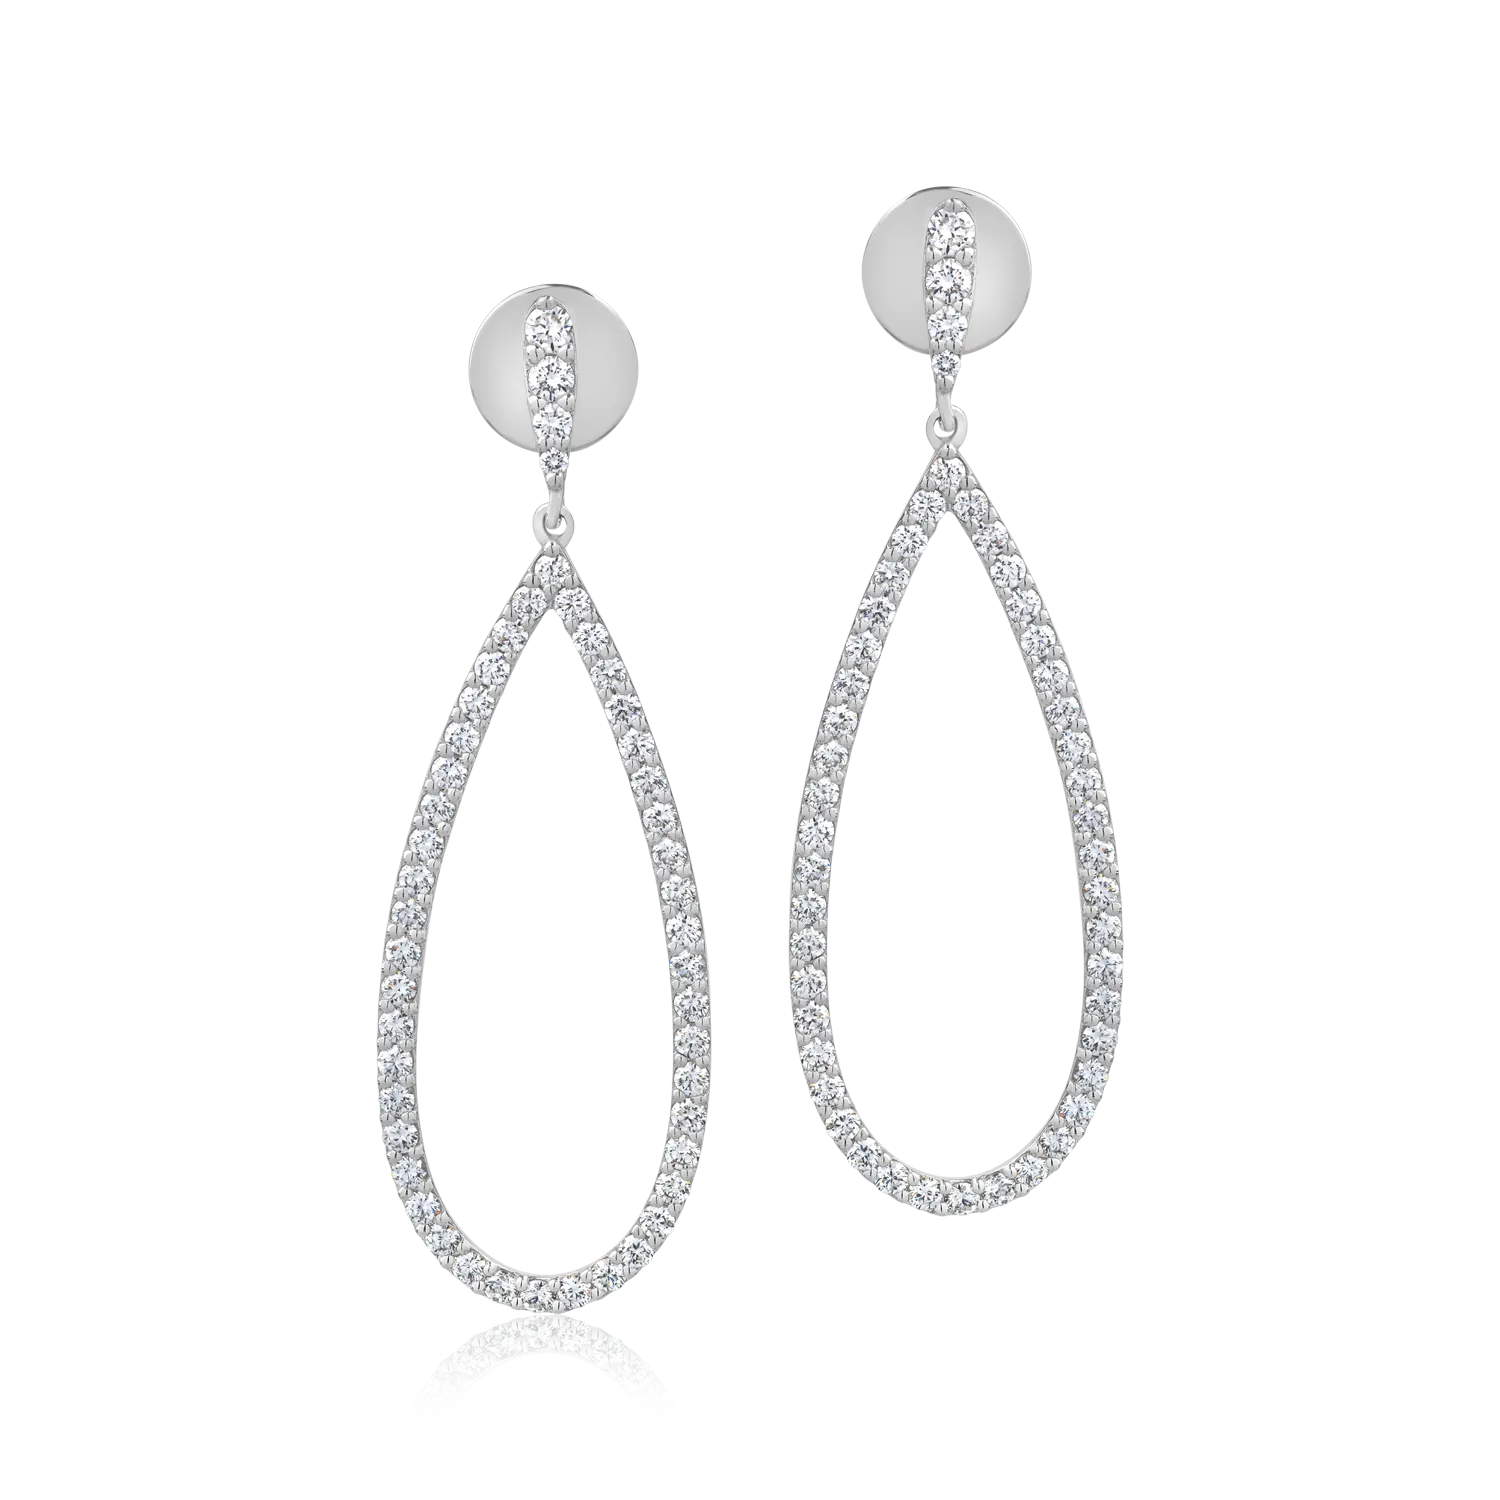 18K white gold earrings with 1.8ct diamonds